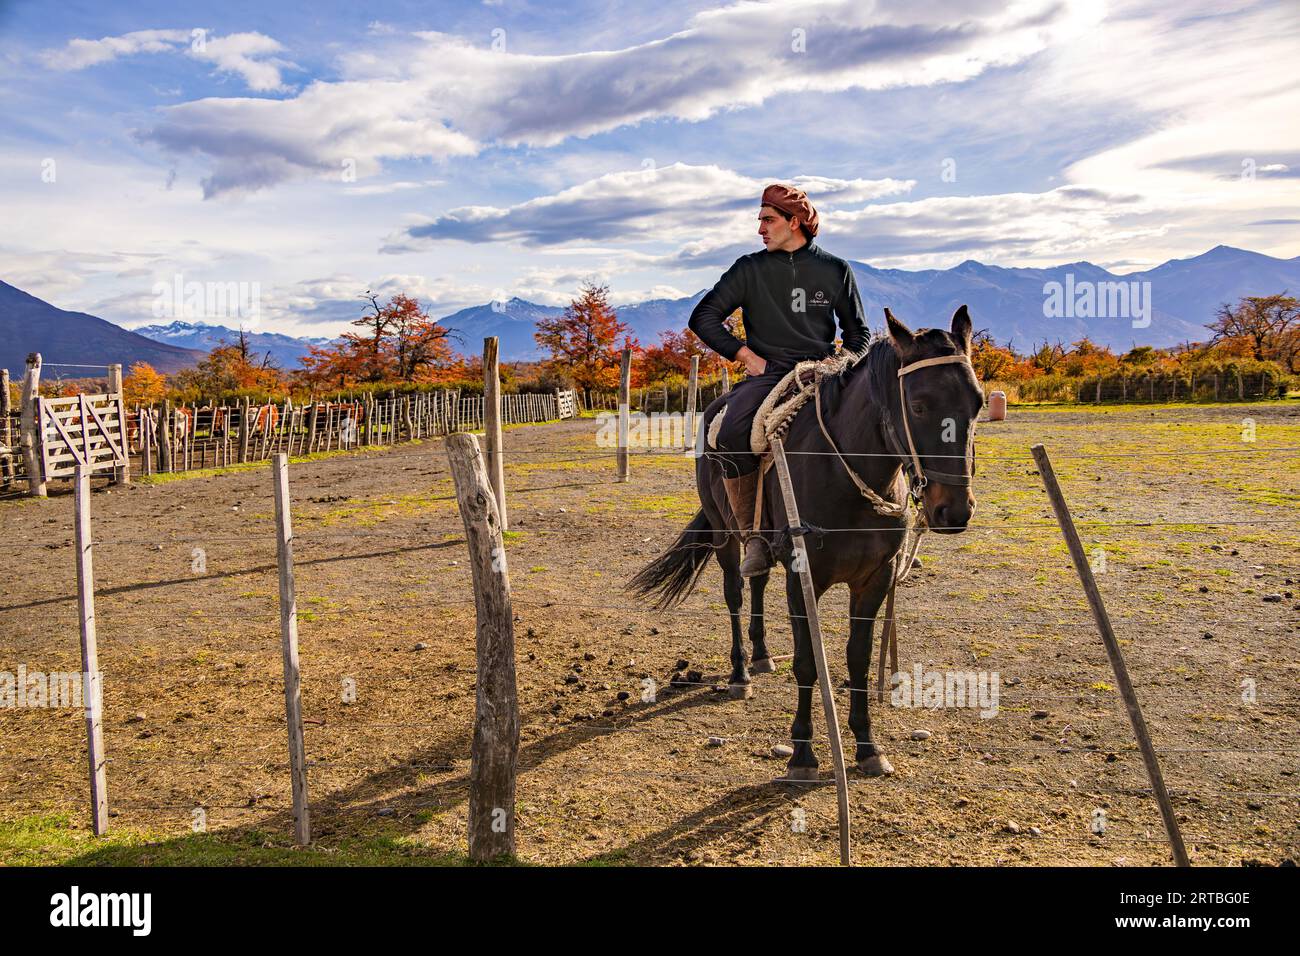 A gaucho cowboy on horseback in front of autumn colored trees on a ranch in Argentina, Patagonia, South America Stock Photo